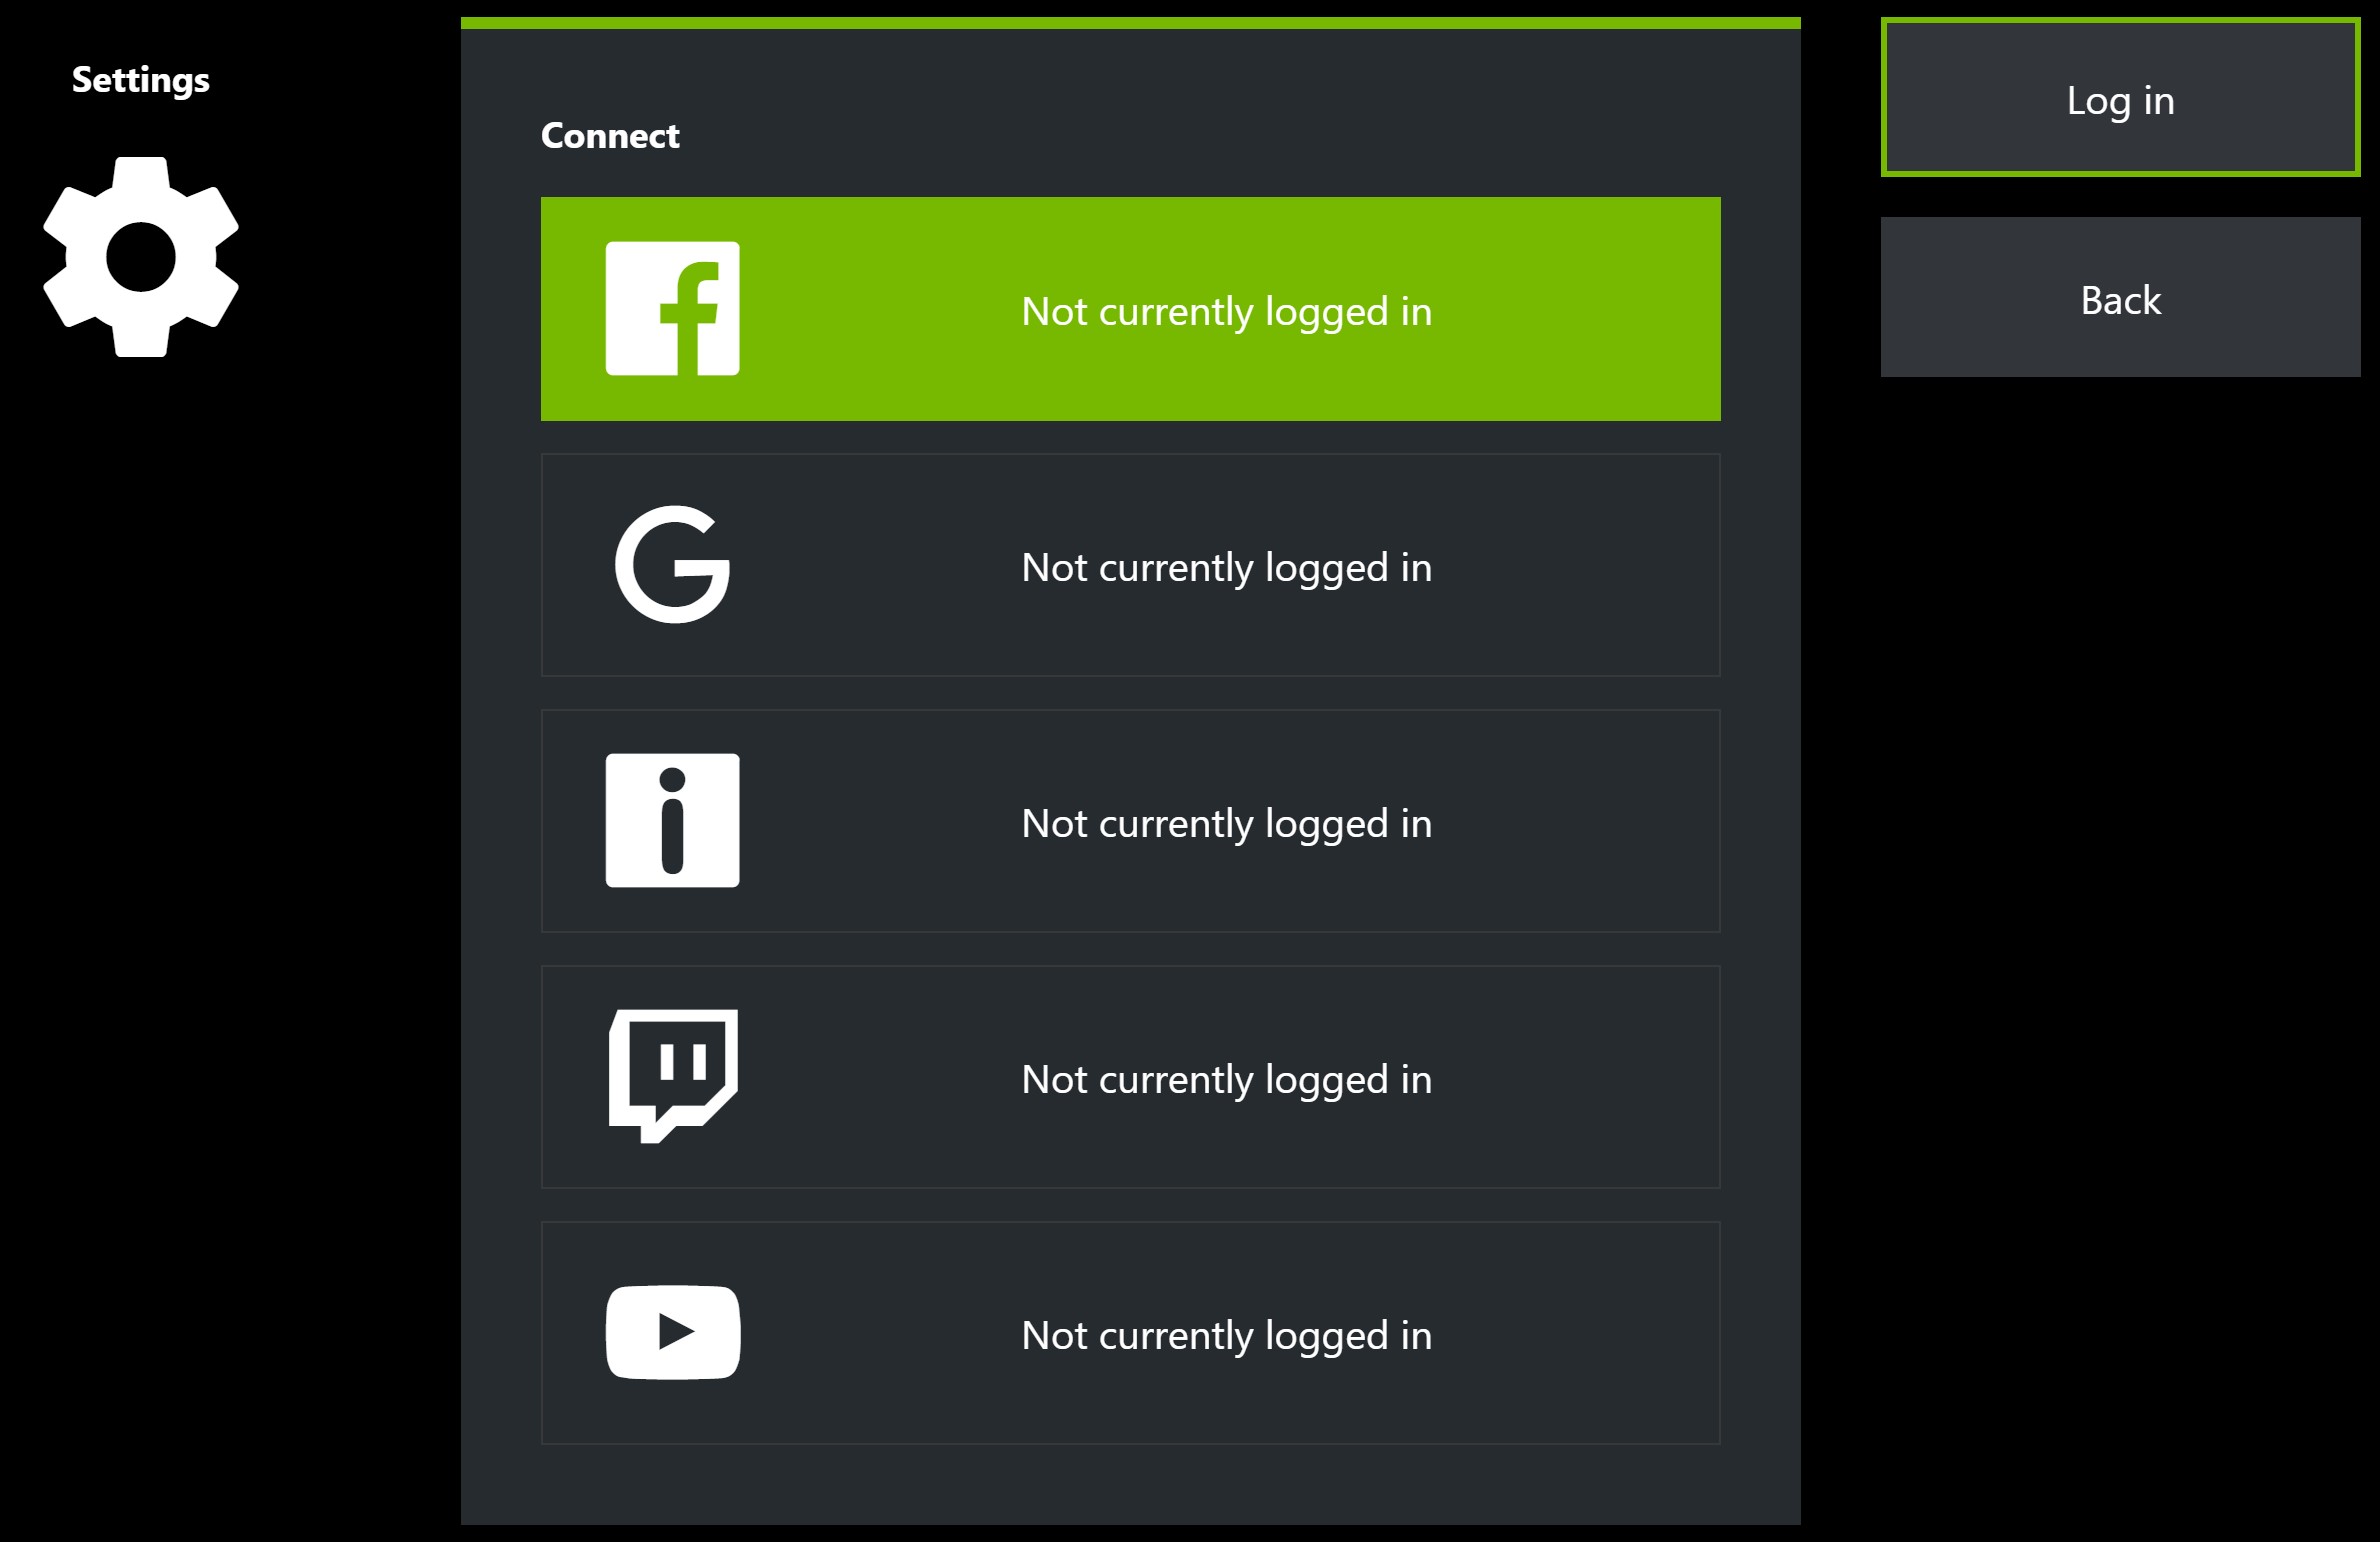 How do I create a Steam account to use with GeForce NOW?